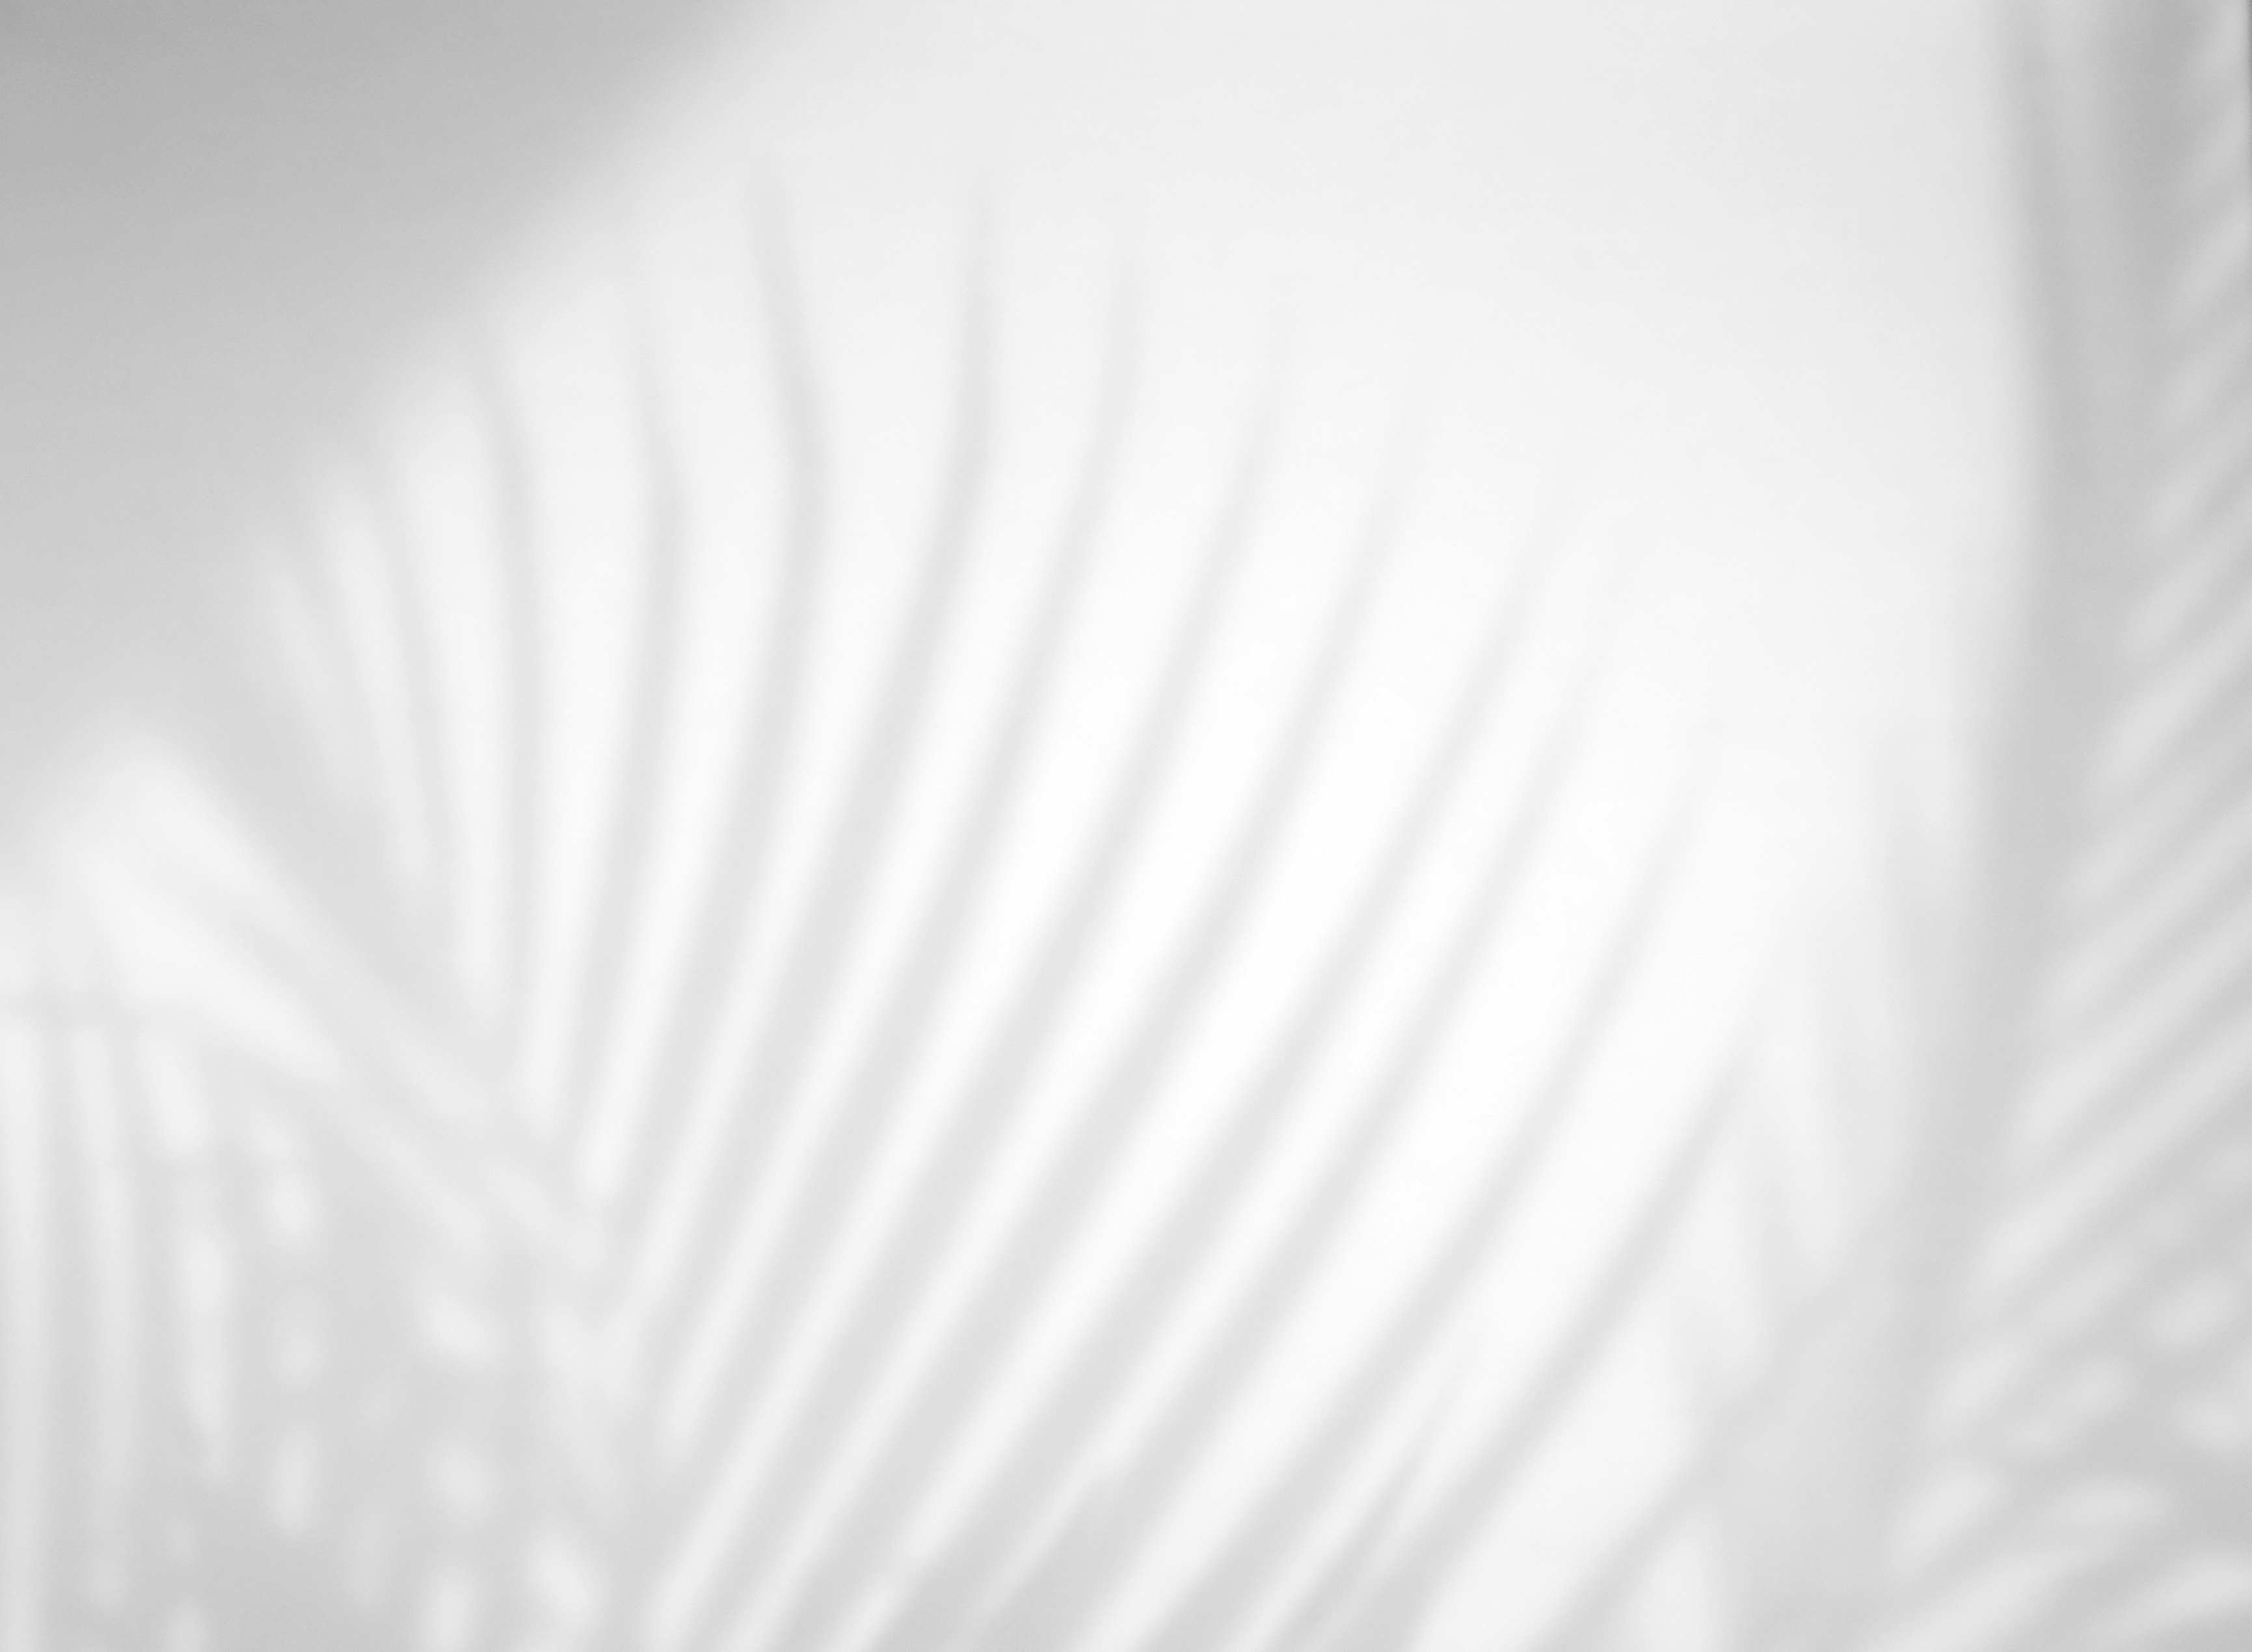 Shadow of Tropical Palm Leaves on White Background